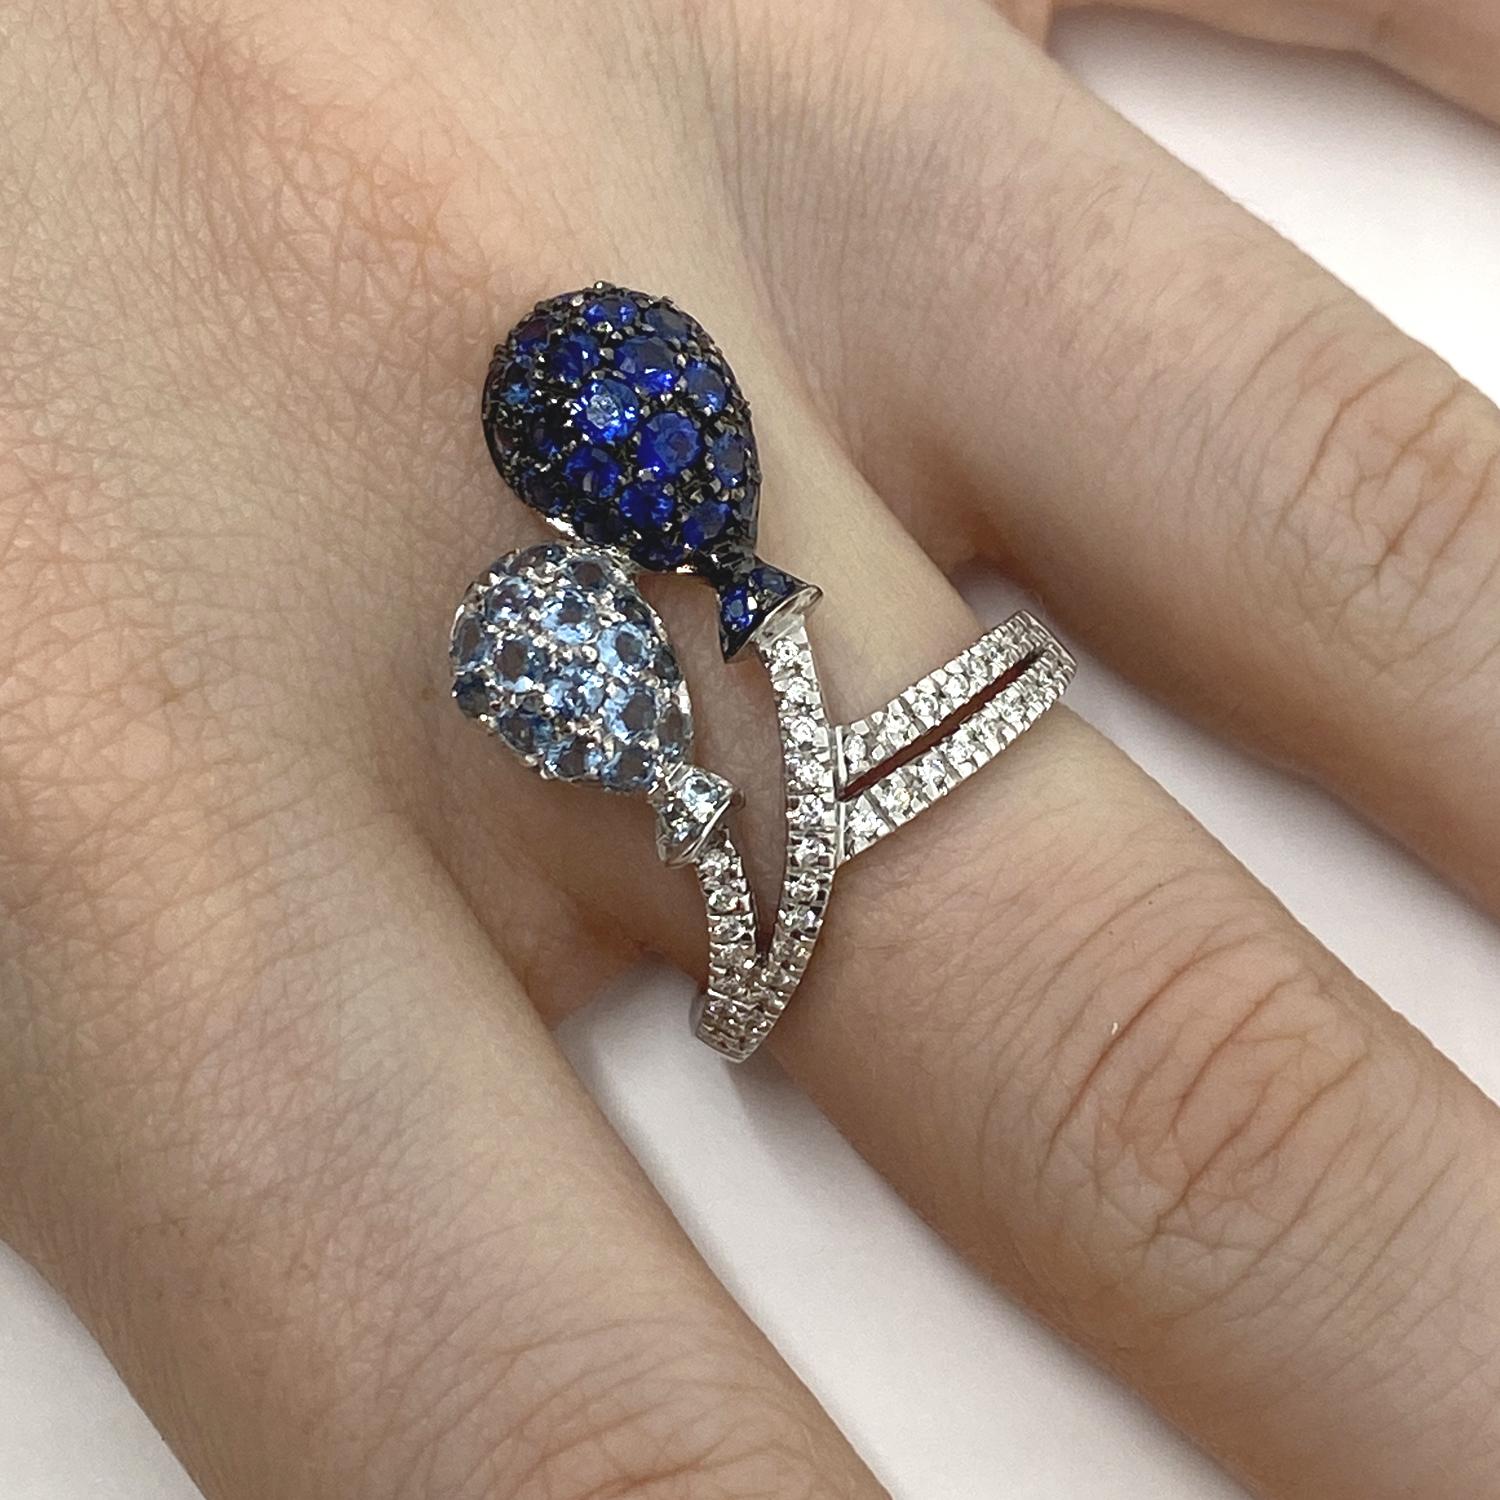 Ring made of 18 kt white gold with 0.21 ct Natural White Diamonds , 1.23 ct Blue Sapphires and 0.75ct aquamarine

Welcome to our jewelry collection, where every piece tells a story of timeless elegance and unparalleled craftsmanship. As a family-run